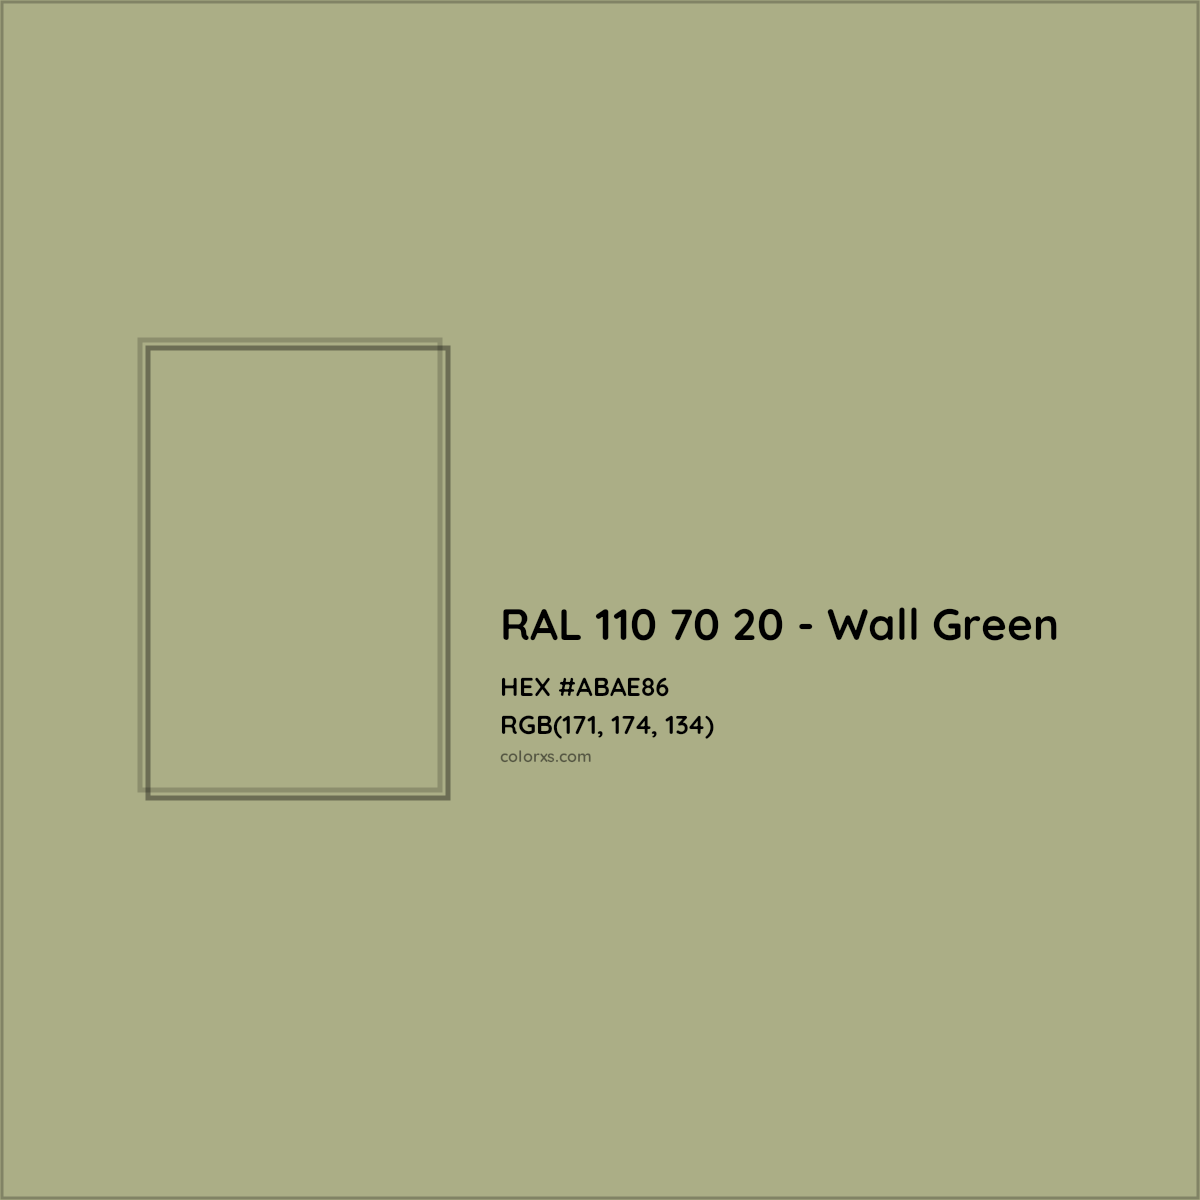 HEX #ABAE86 RAL 110 70 20 - Wall Green CMS RAL Design - Color Code